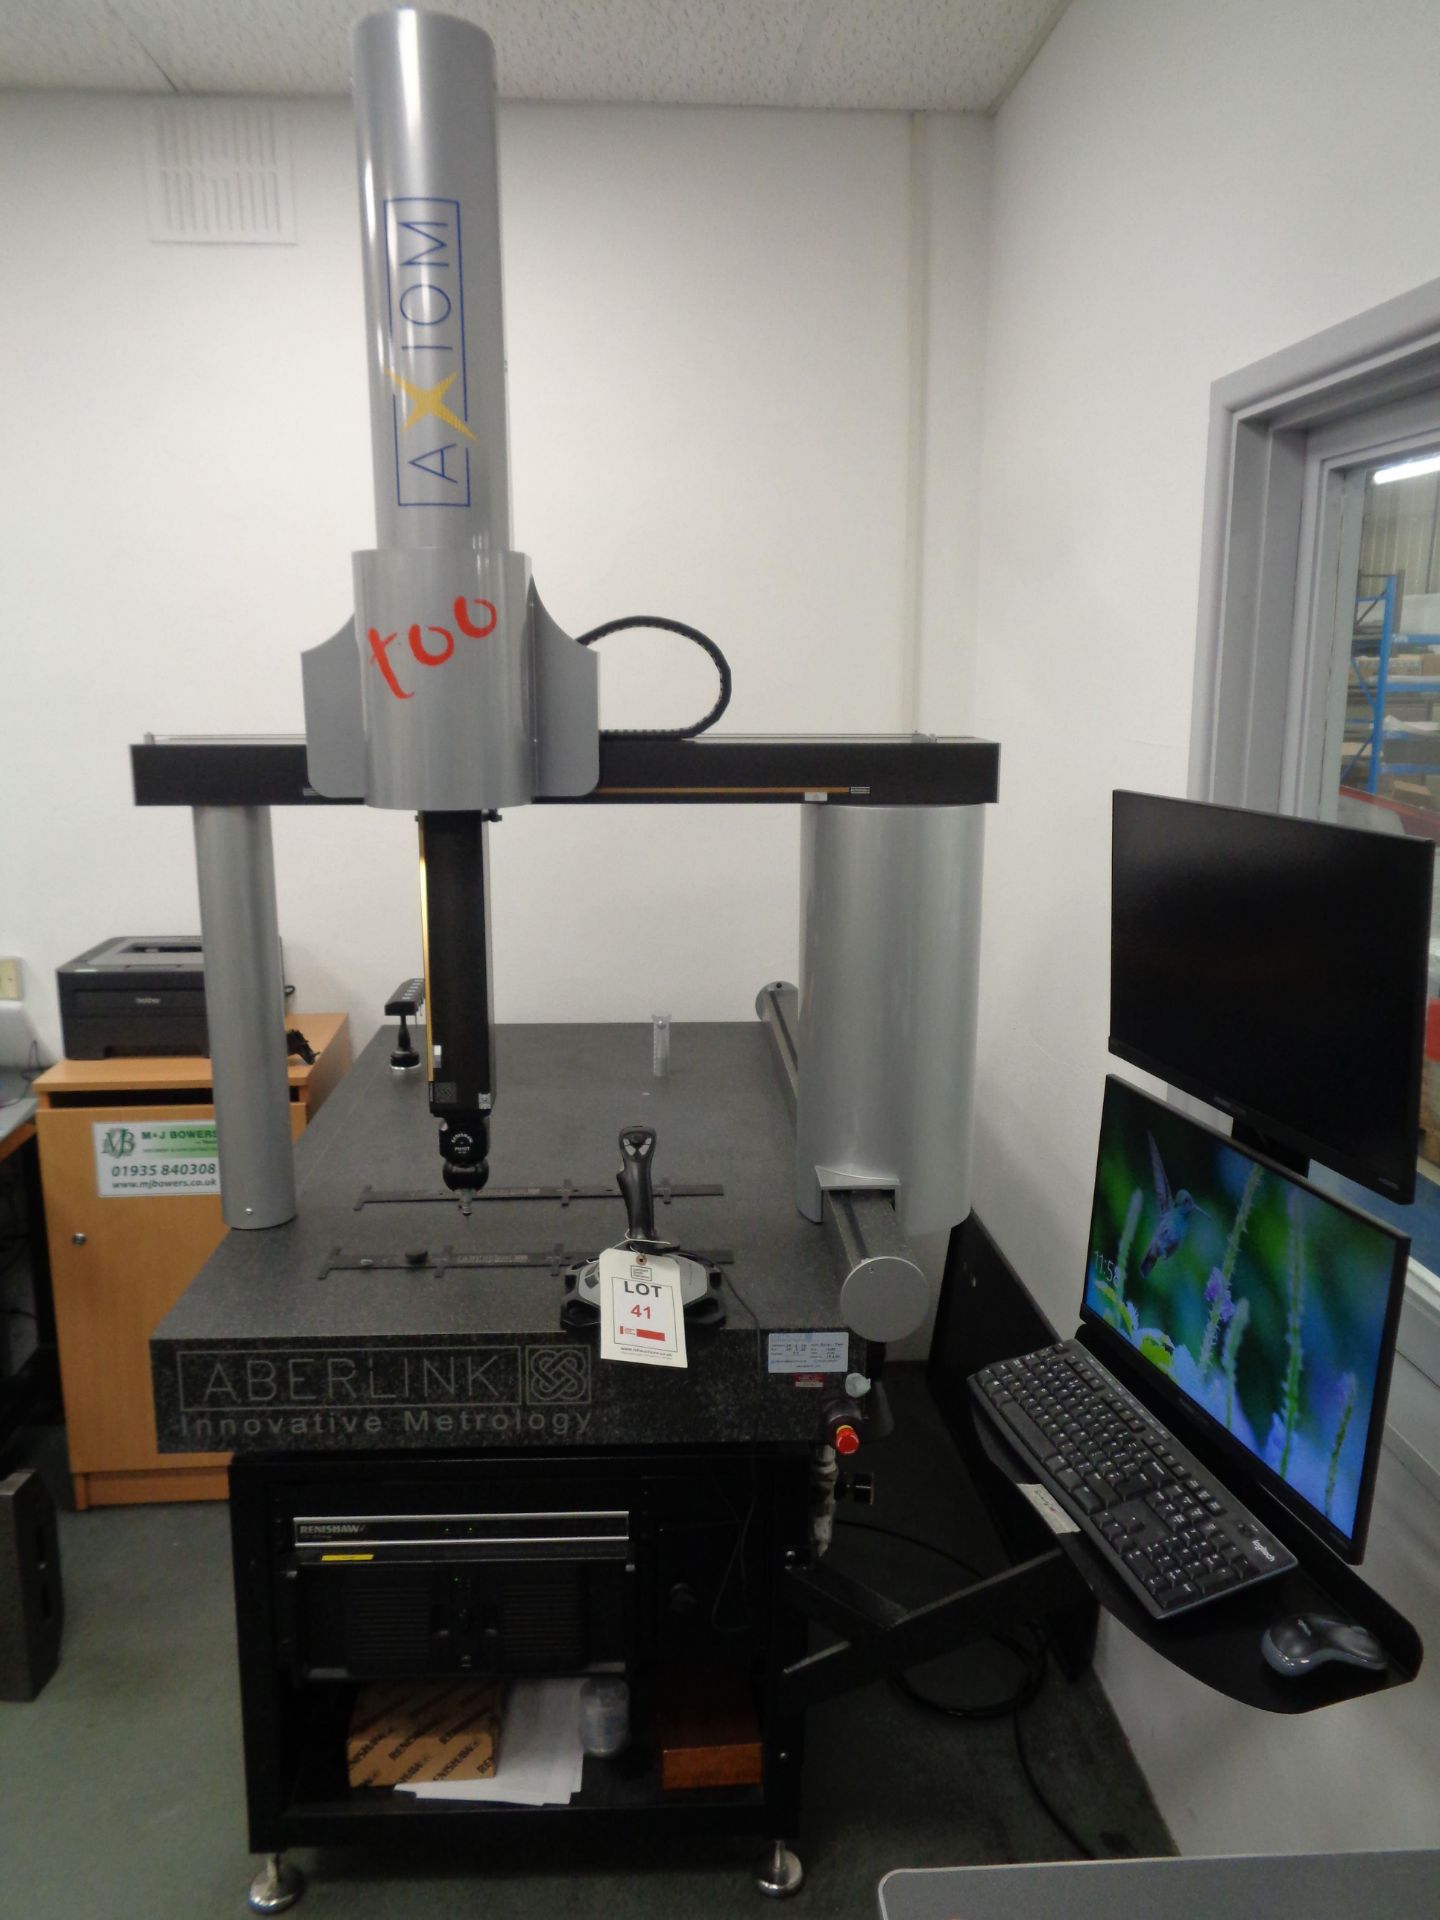 Aberlink Axiom T00 CNC Coordinate measuring machine serial no. 15350 (2020) size 1200mm, Renishaw - Image 2 of 7